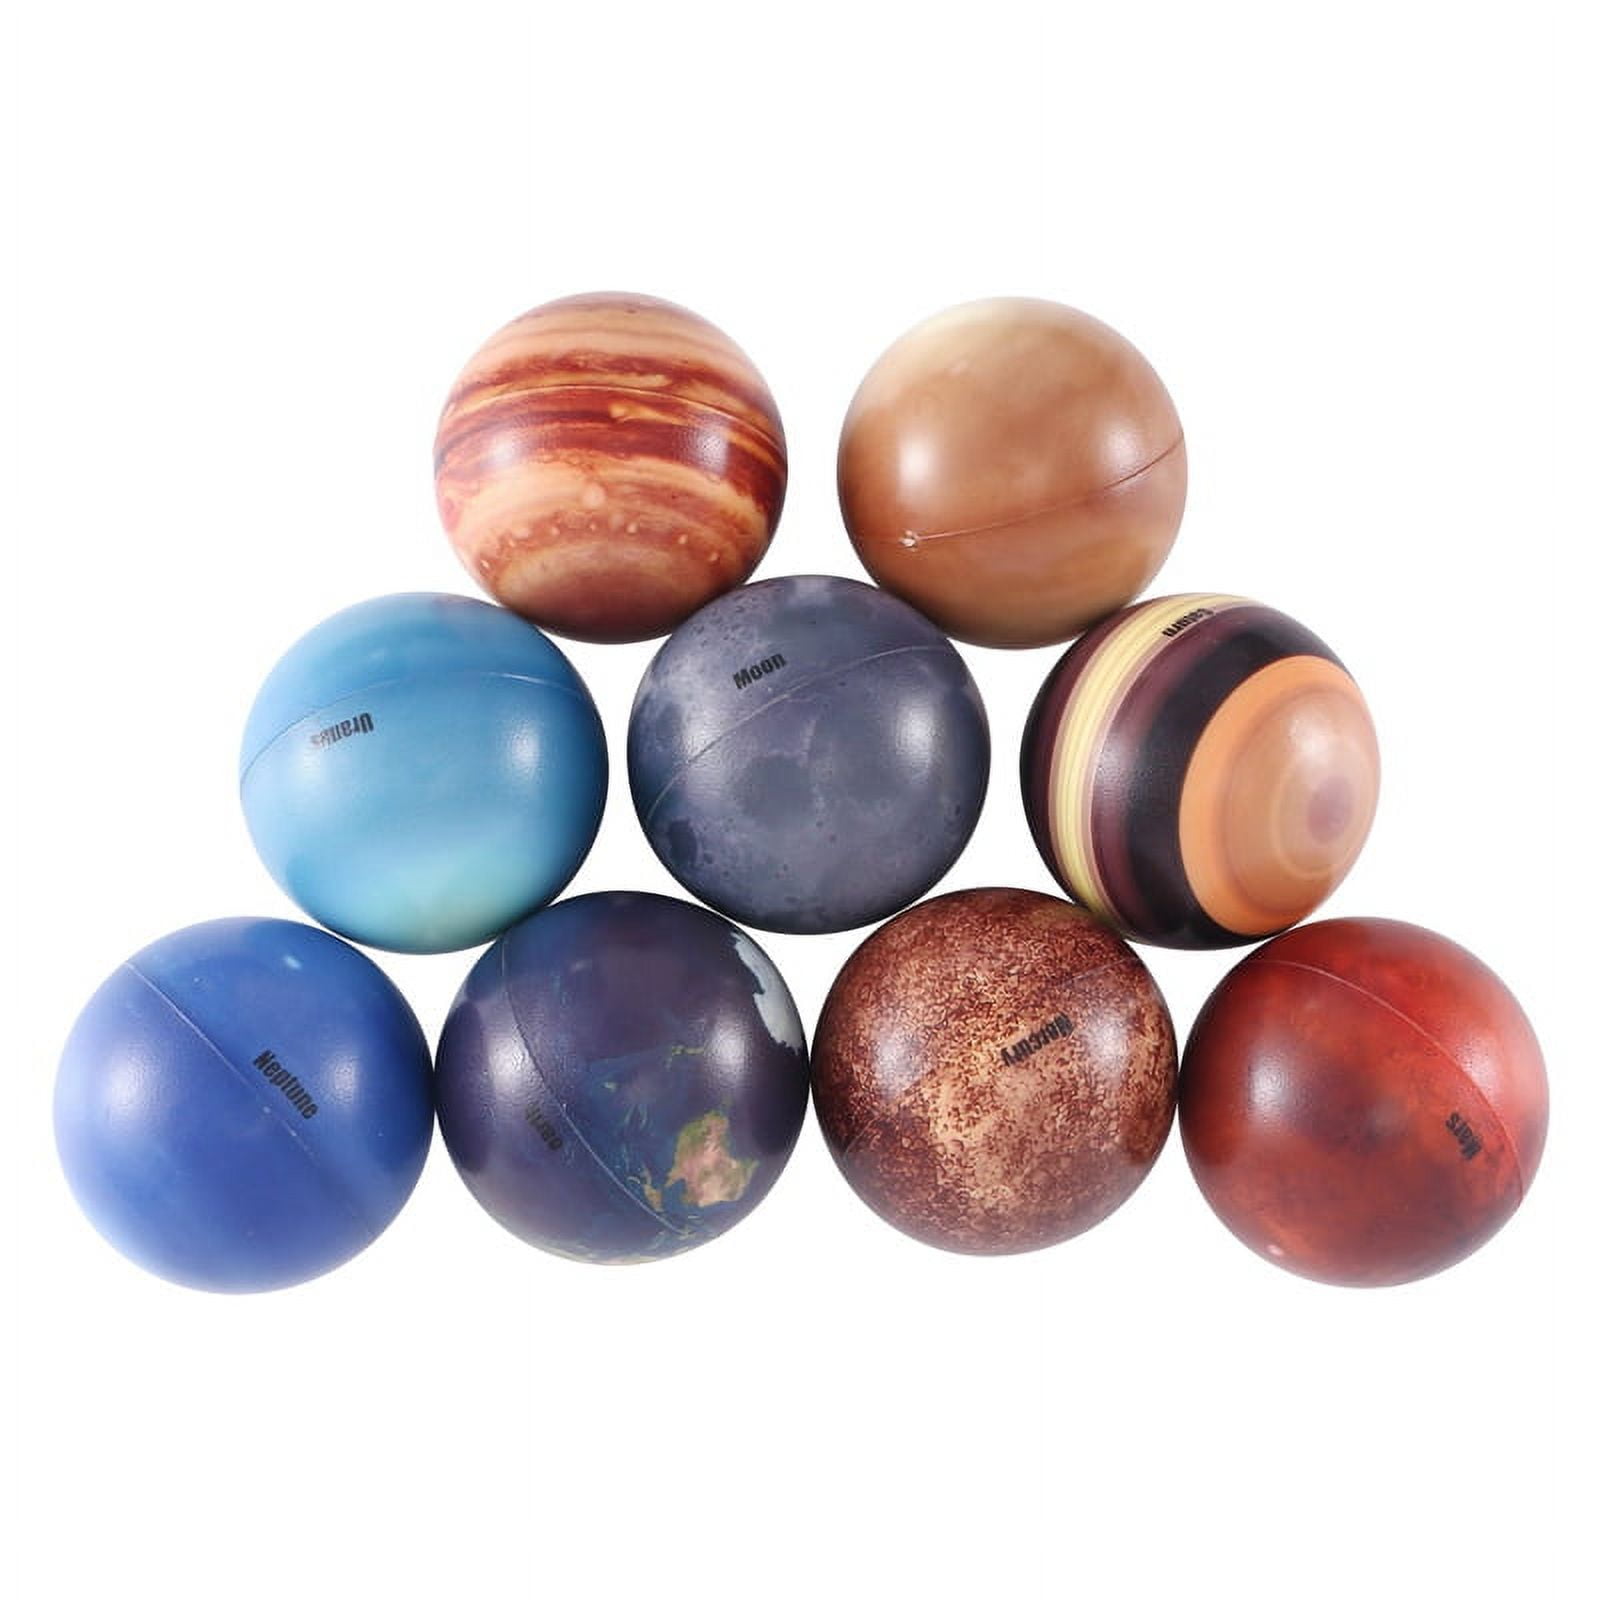 Hemousy Solar System Squeeze Balls Relaxing Planet Toy for